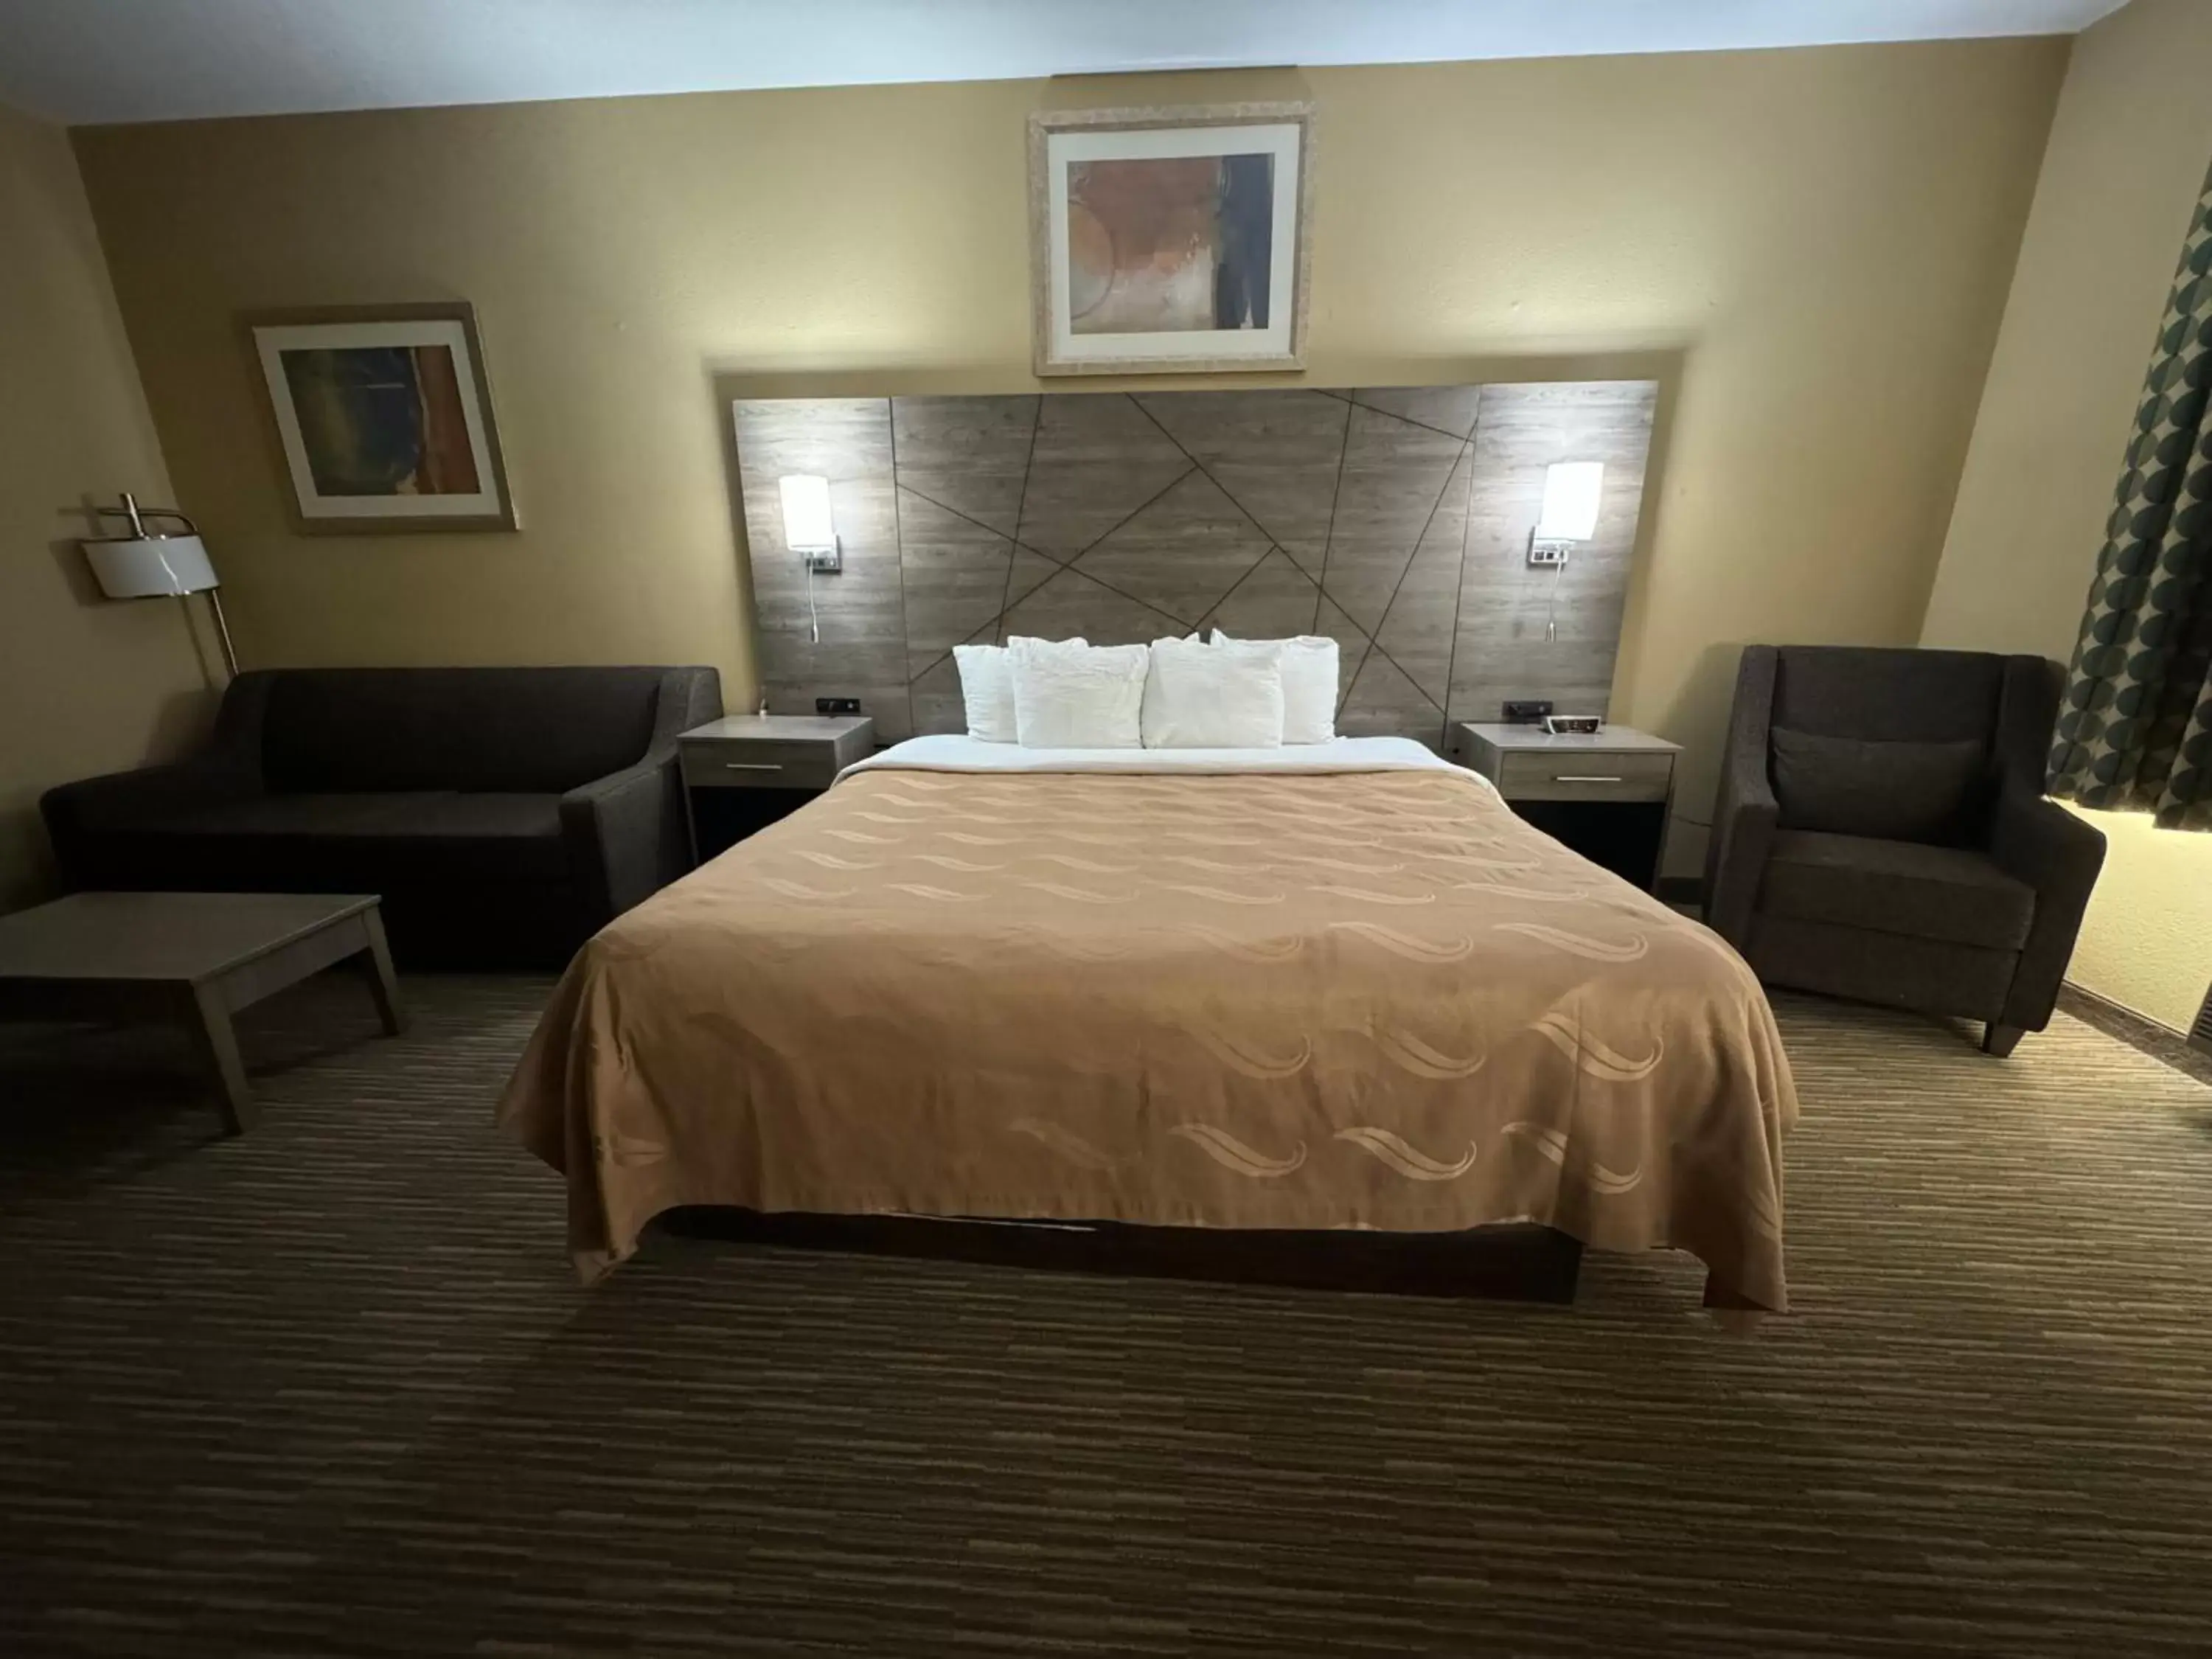 Bed in Quality Inn near I-72 and Hwy 51